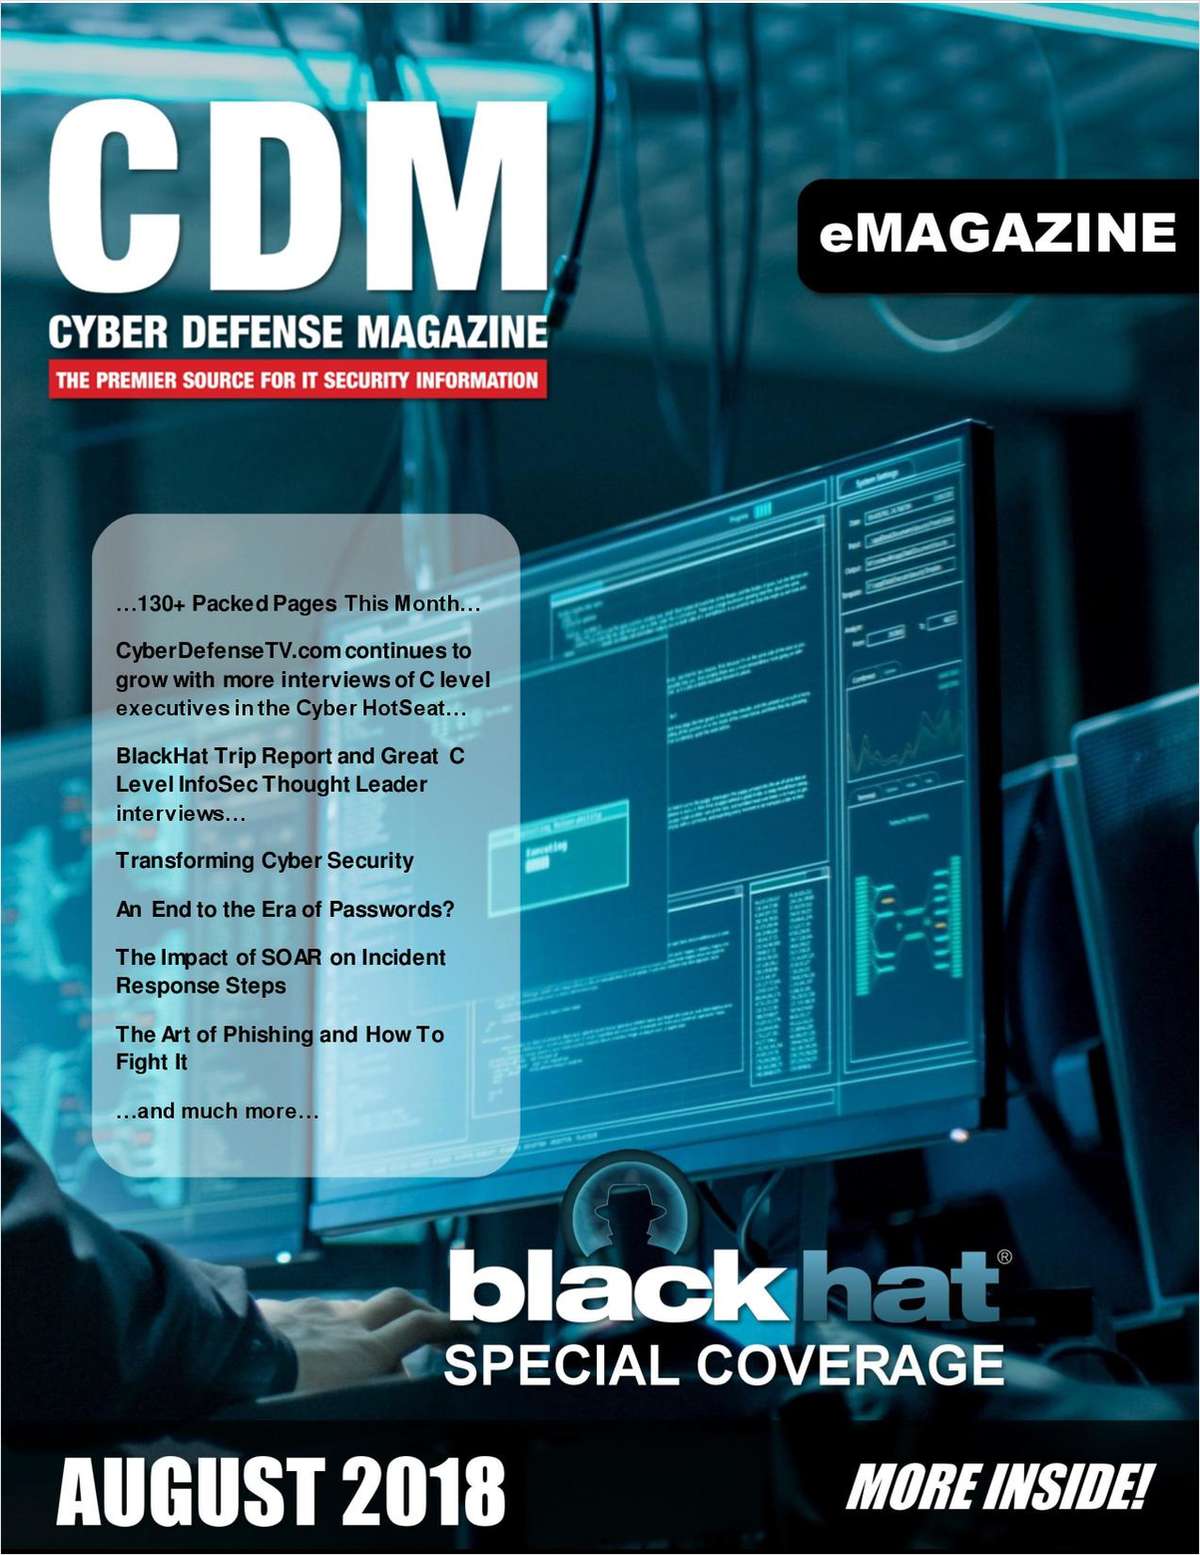 Cyber Defense eMagazine - BlackHat Special Coverage - August 2018 Edition